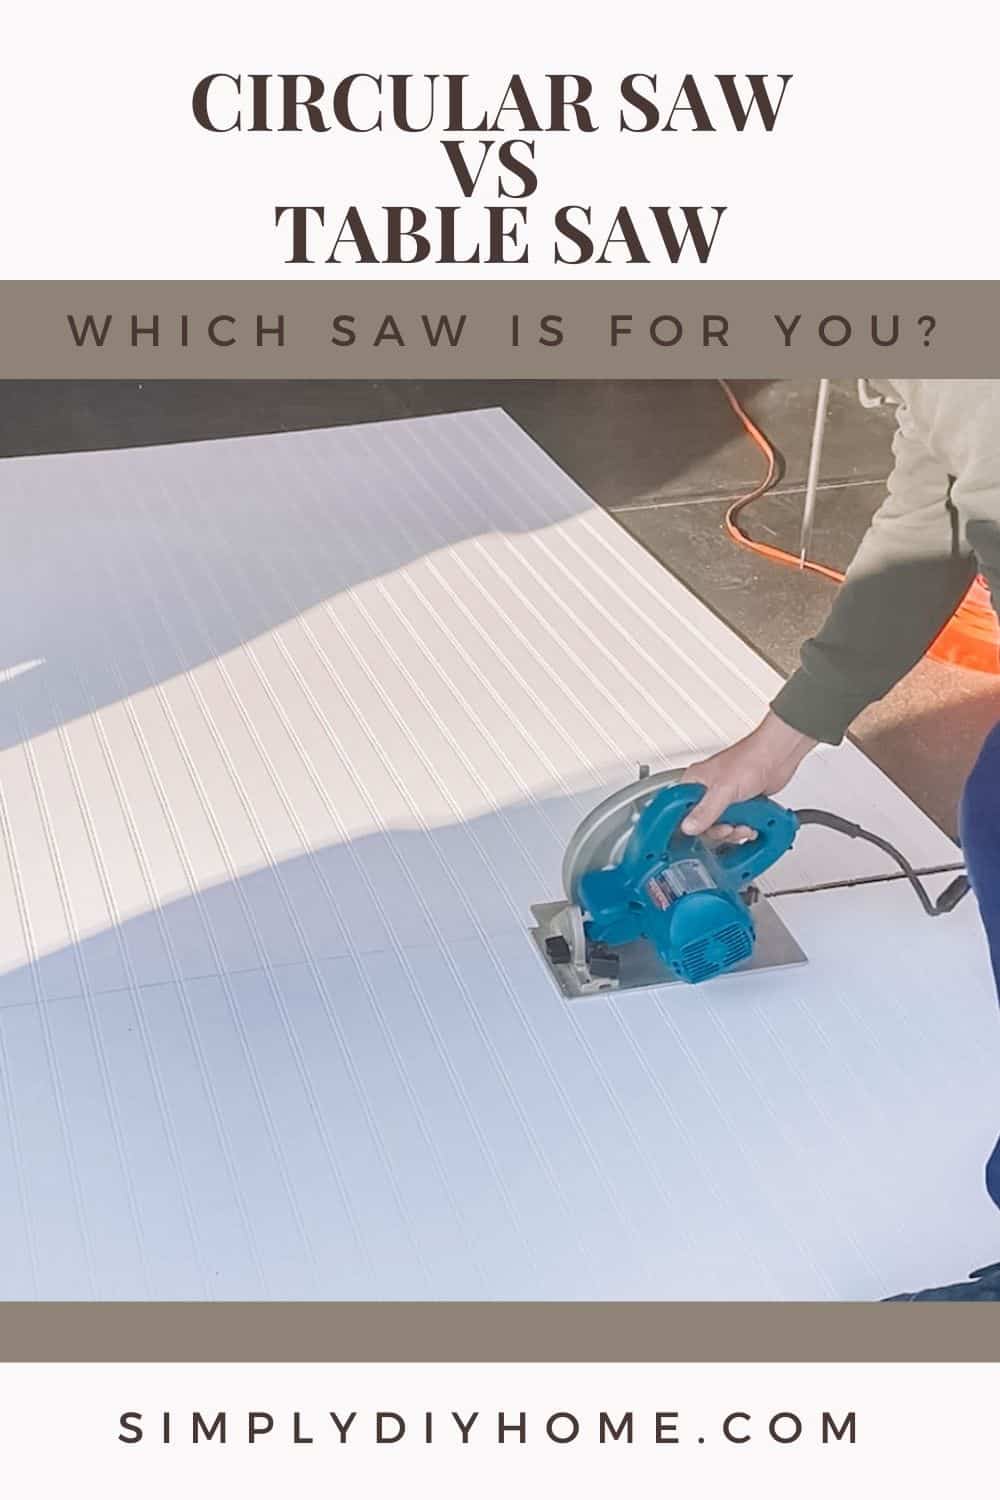 Circular Saw vs Table Saw-What is the most useful saw?